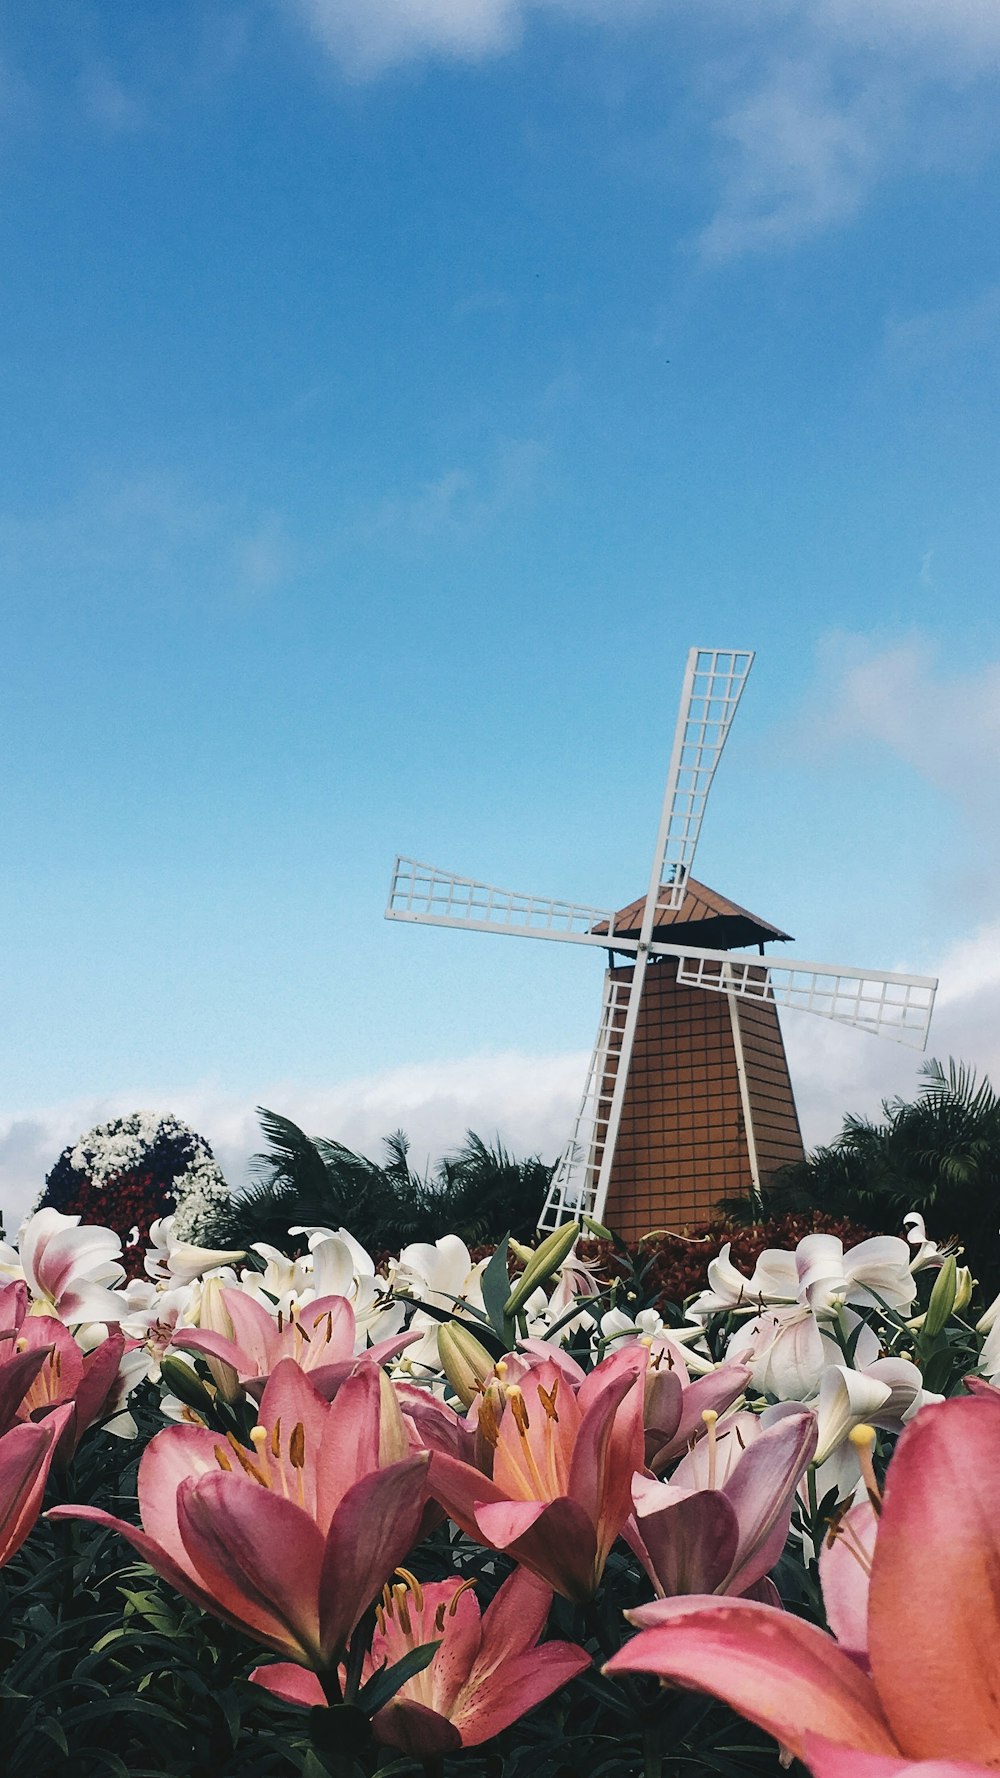 brown windmill surrounded by pink and white flowers under blue sky during daytime